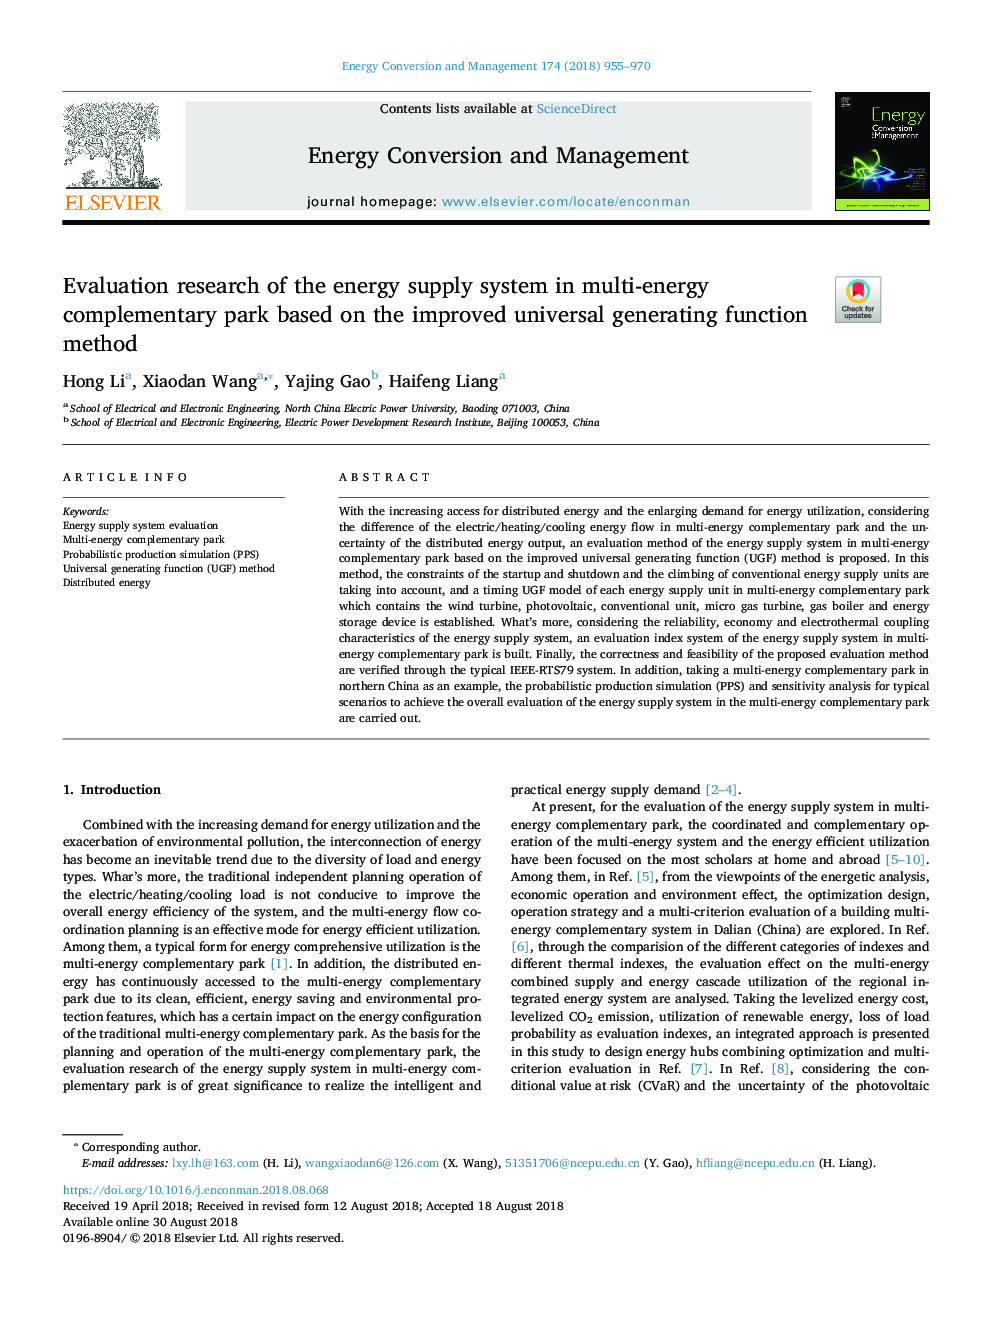 Evaluation research of the energy supply system in multi-energy complementary park based on the improved universal generating function method